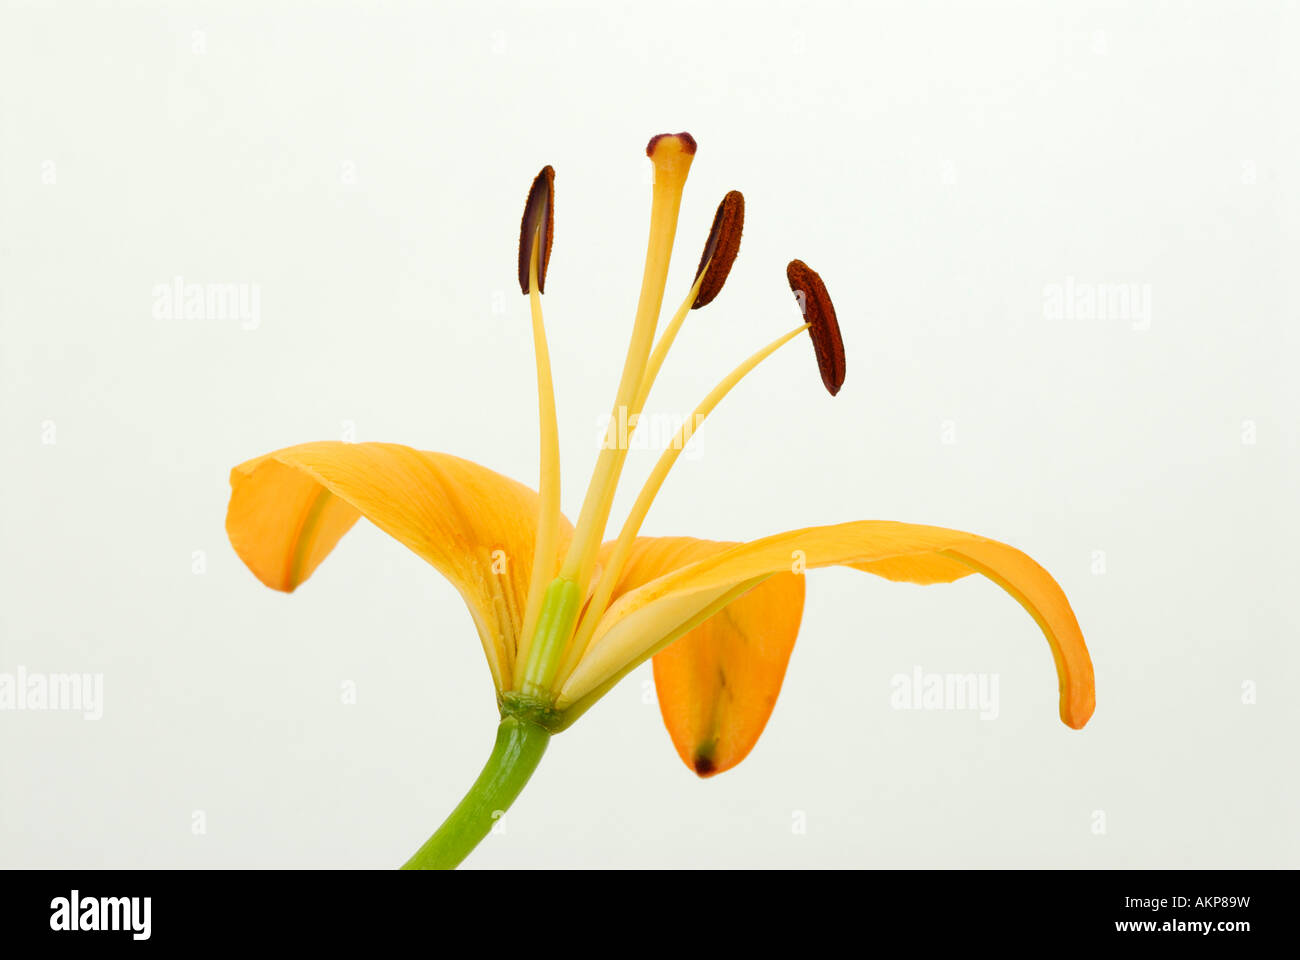 Cross section of flower showing ovary, carpel, stamens and other reproductive structures parts Stock Photo